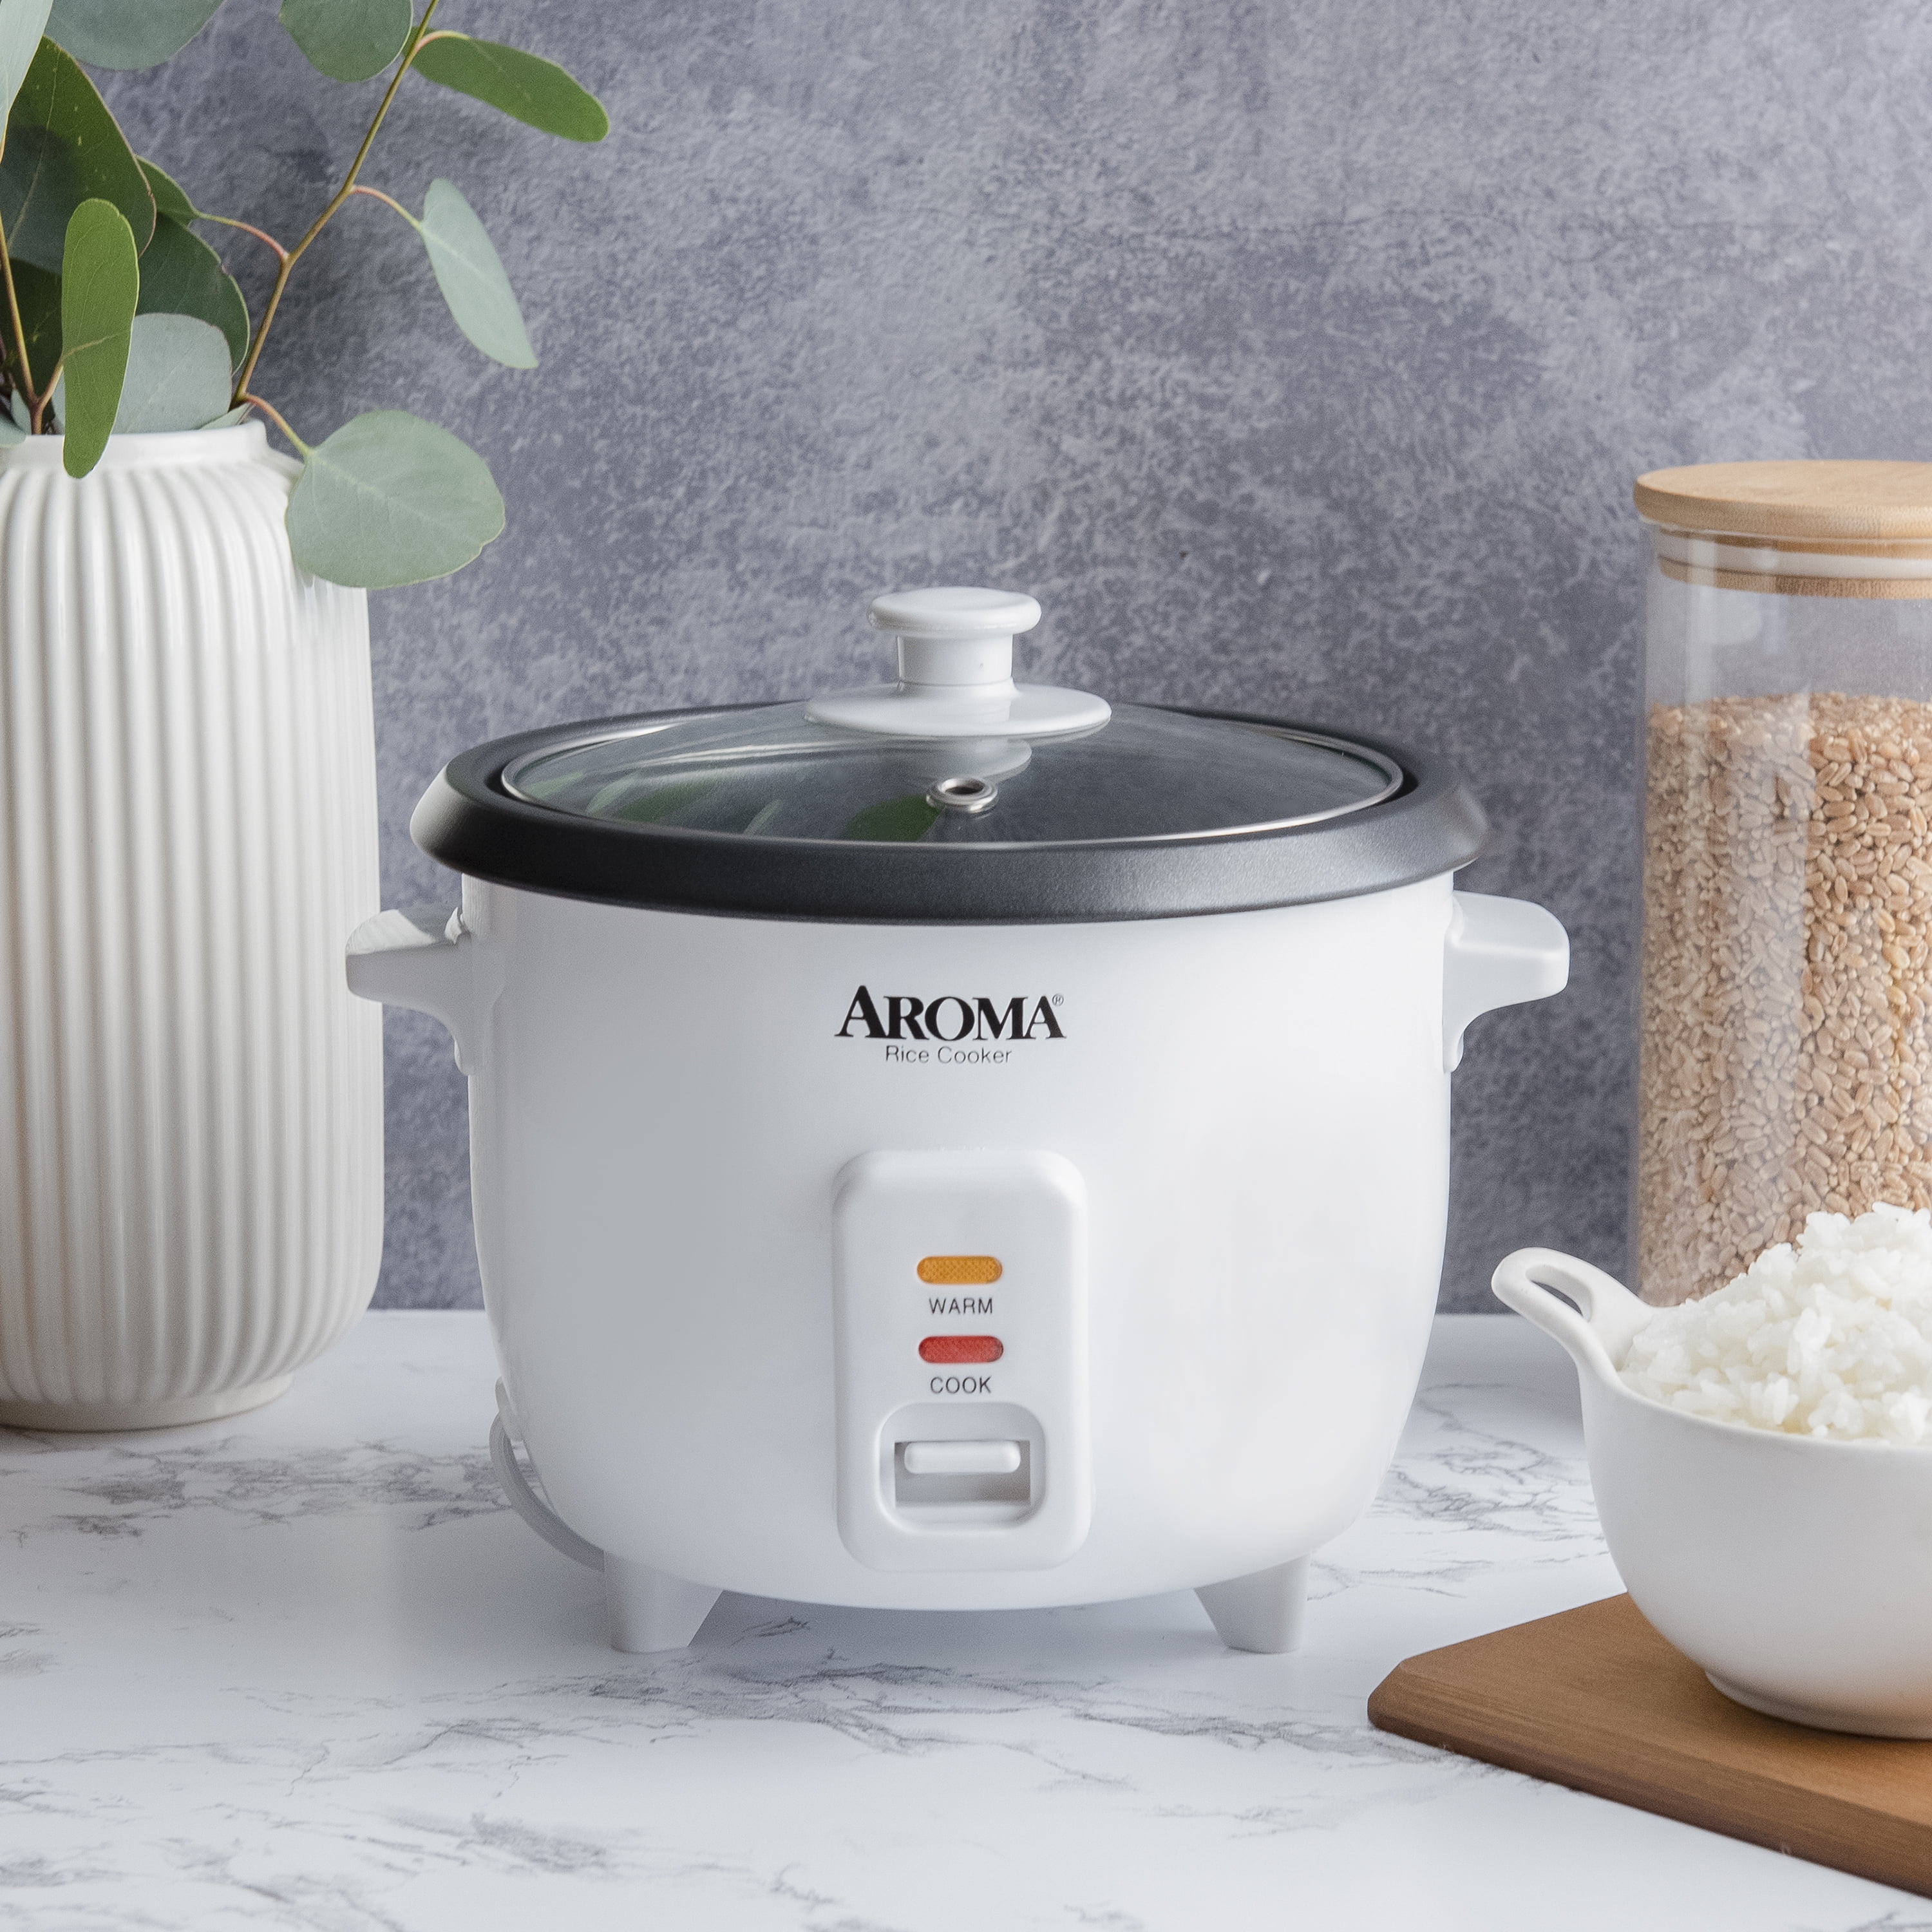 Aroma 6 Cup White Simply Stainless Pot - White